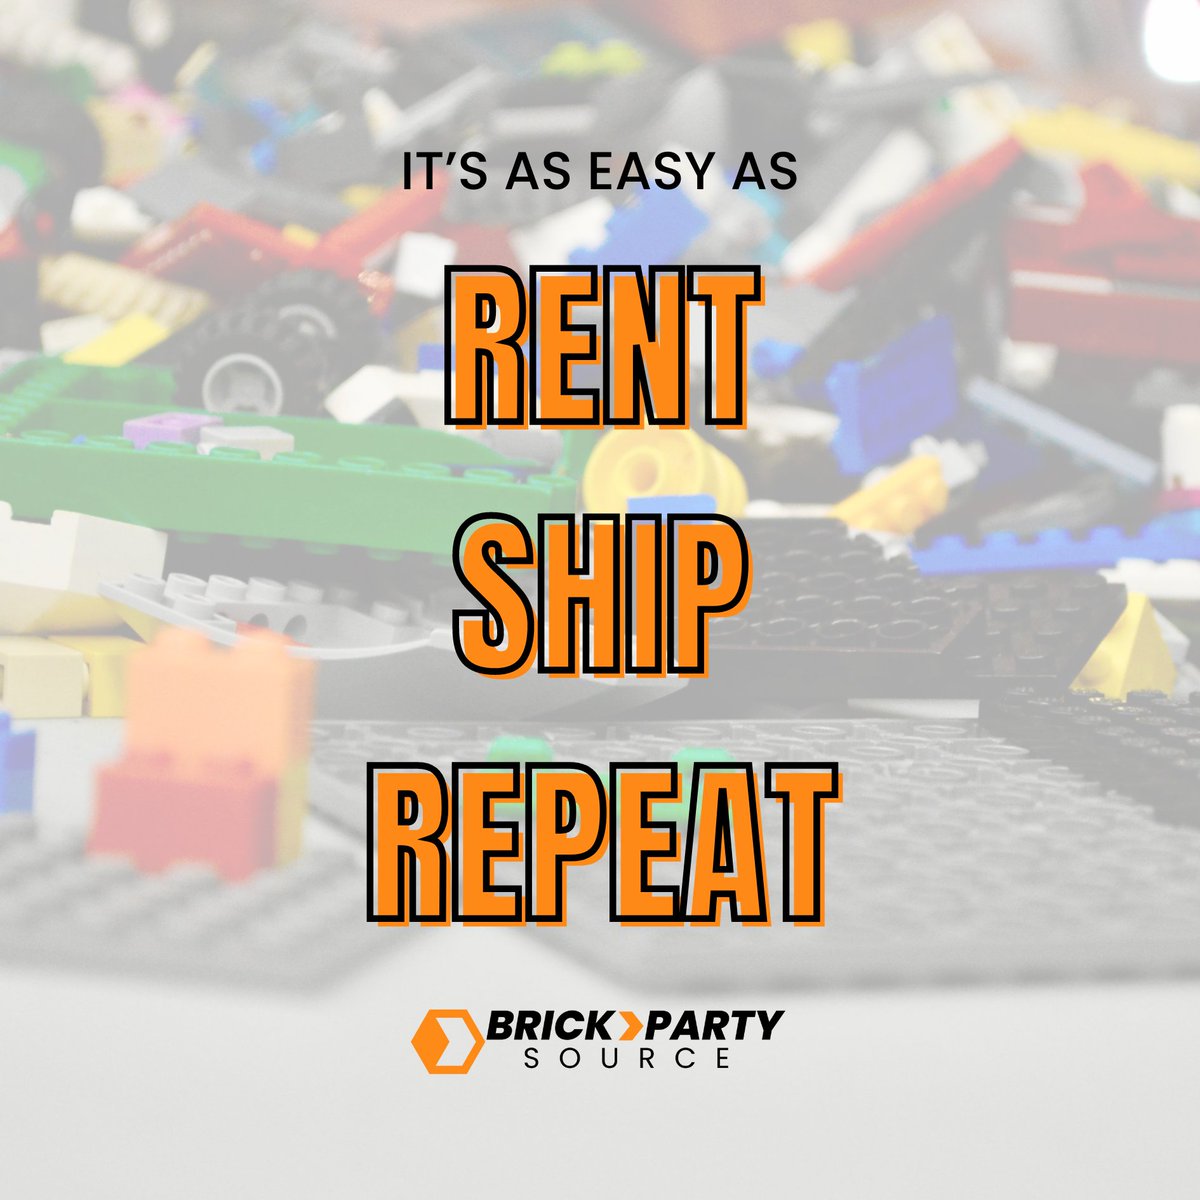 Renting 25 pounds of LEGO® bricks is as easy as rent, ship, repeat!

#BrickPartySource #rentshiprepeat #LEGOfun #LEGOideas